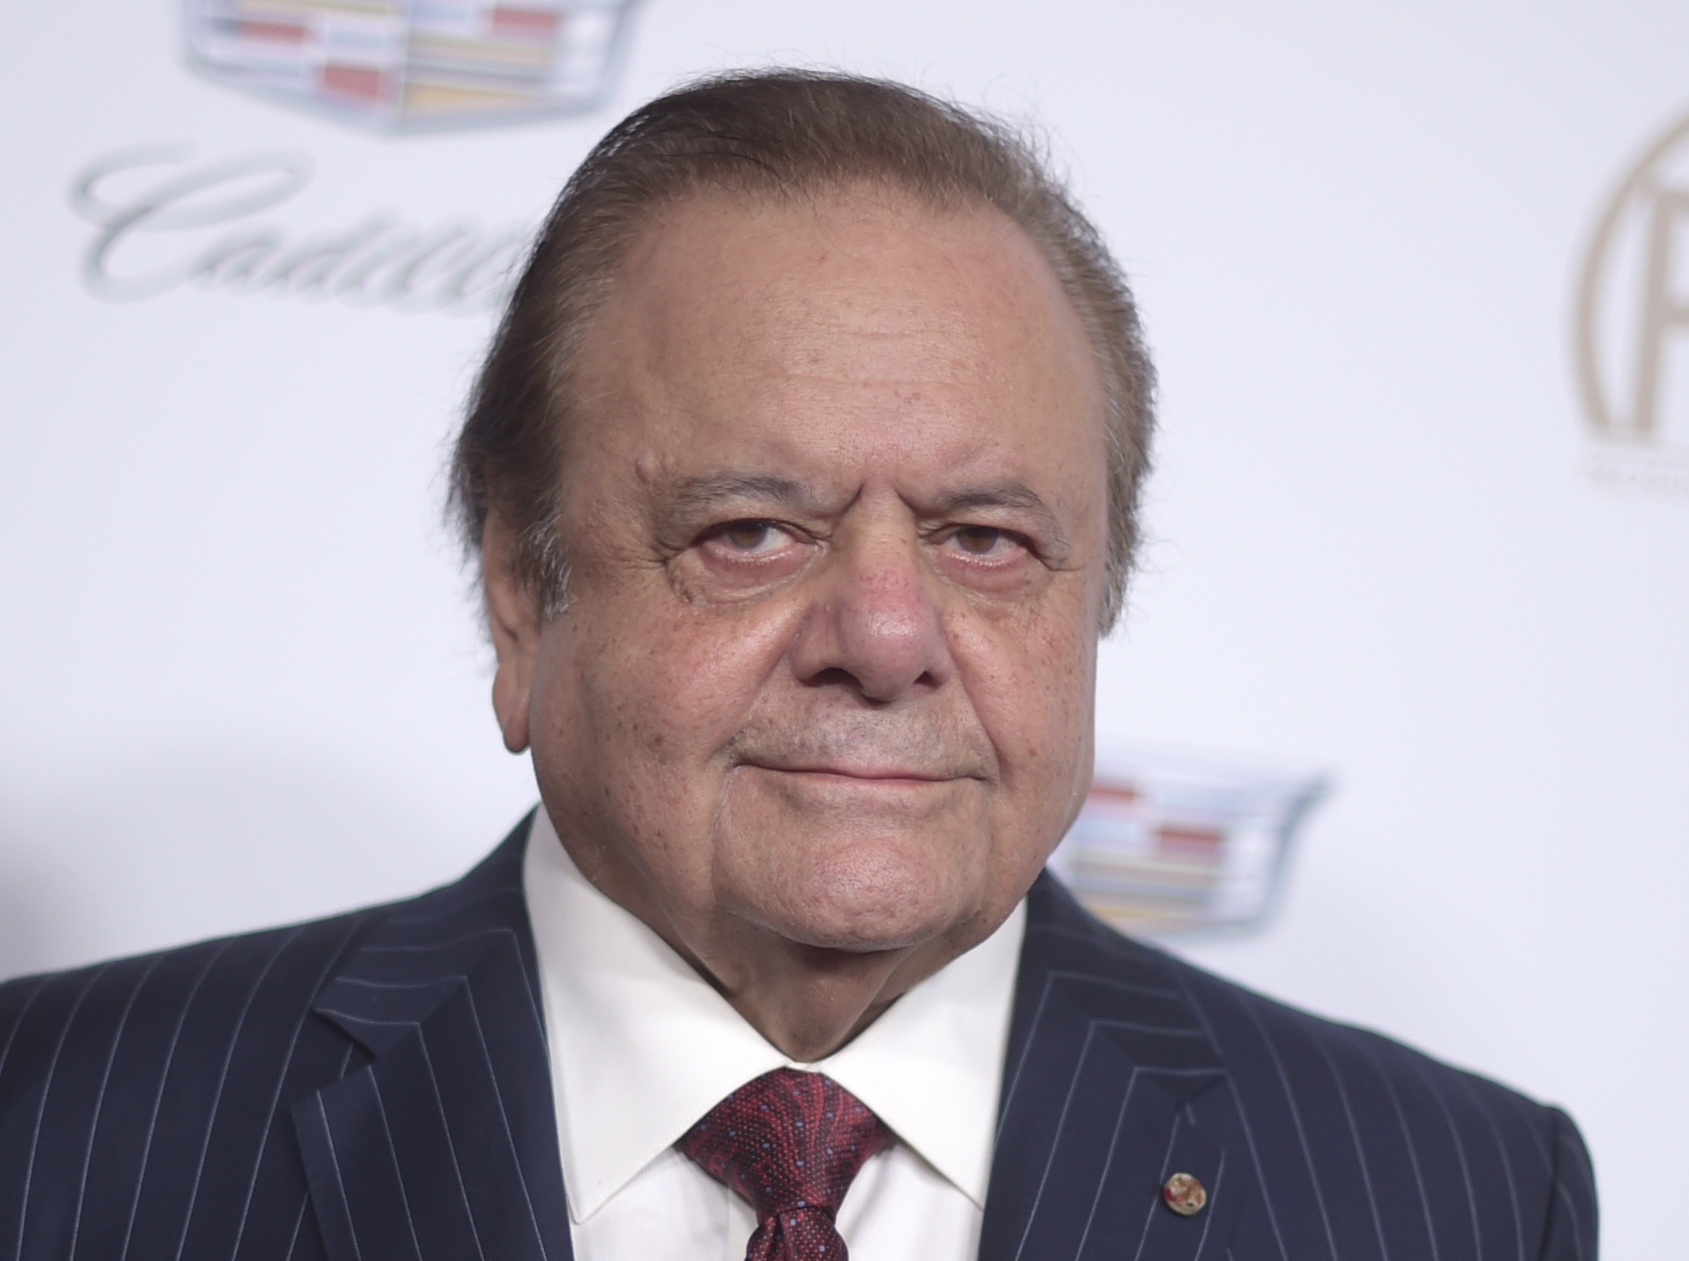 FILE - Paul Sorvino arrives at the 29th annual Producers Guild Awards at the Beverly Hilton on Saturday, Jan. 20, 2018, in Beverly Hills, Calif. Sorvino, an imposing actor who specialized in playing crooks and cops like Paulie Cicero in “Goodfellas” and the NYPD sergeant Phil Cerretta on “Law & Order,” has died. He was 83. (Photo by Richard Shotwell/Invision/AP, File)